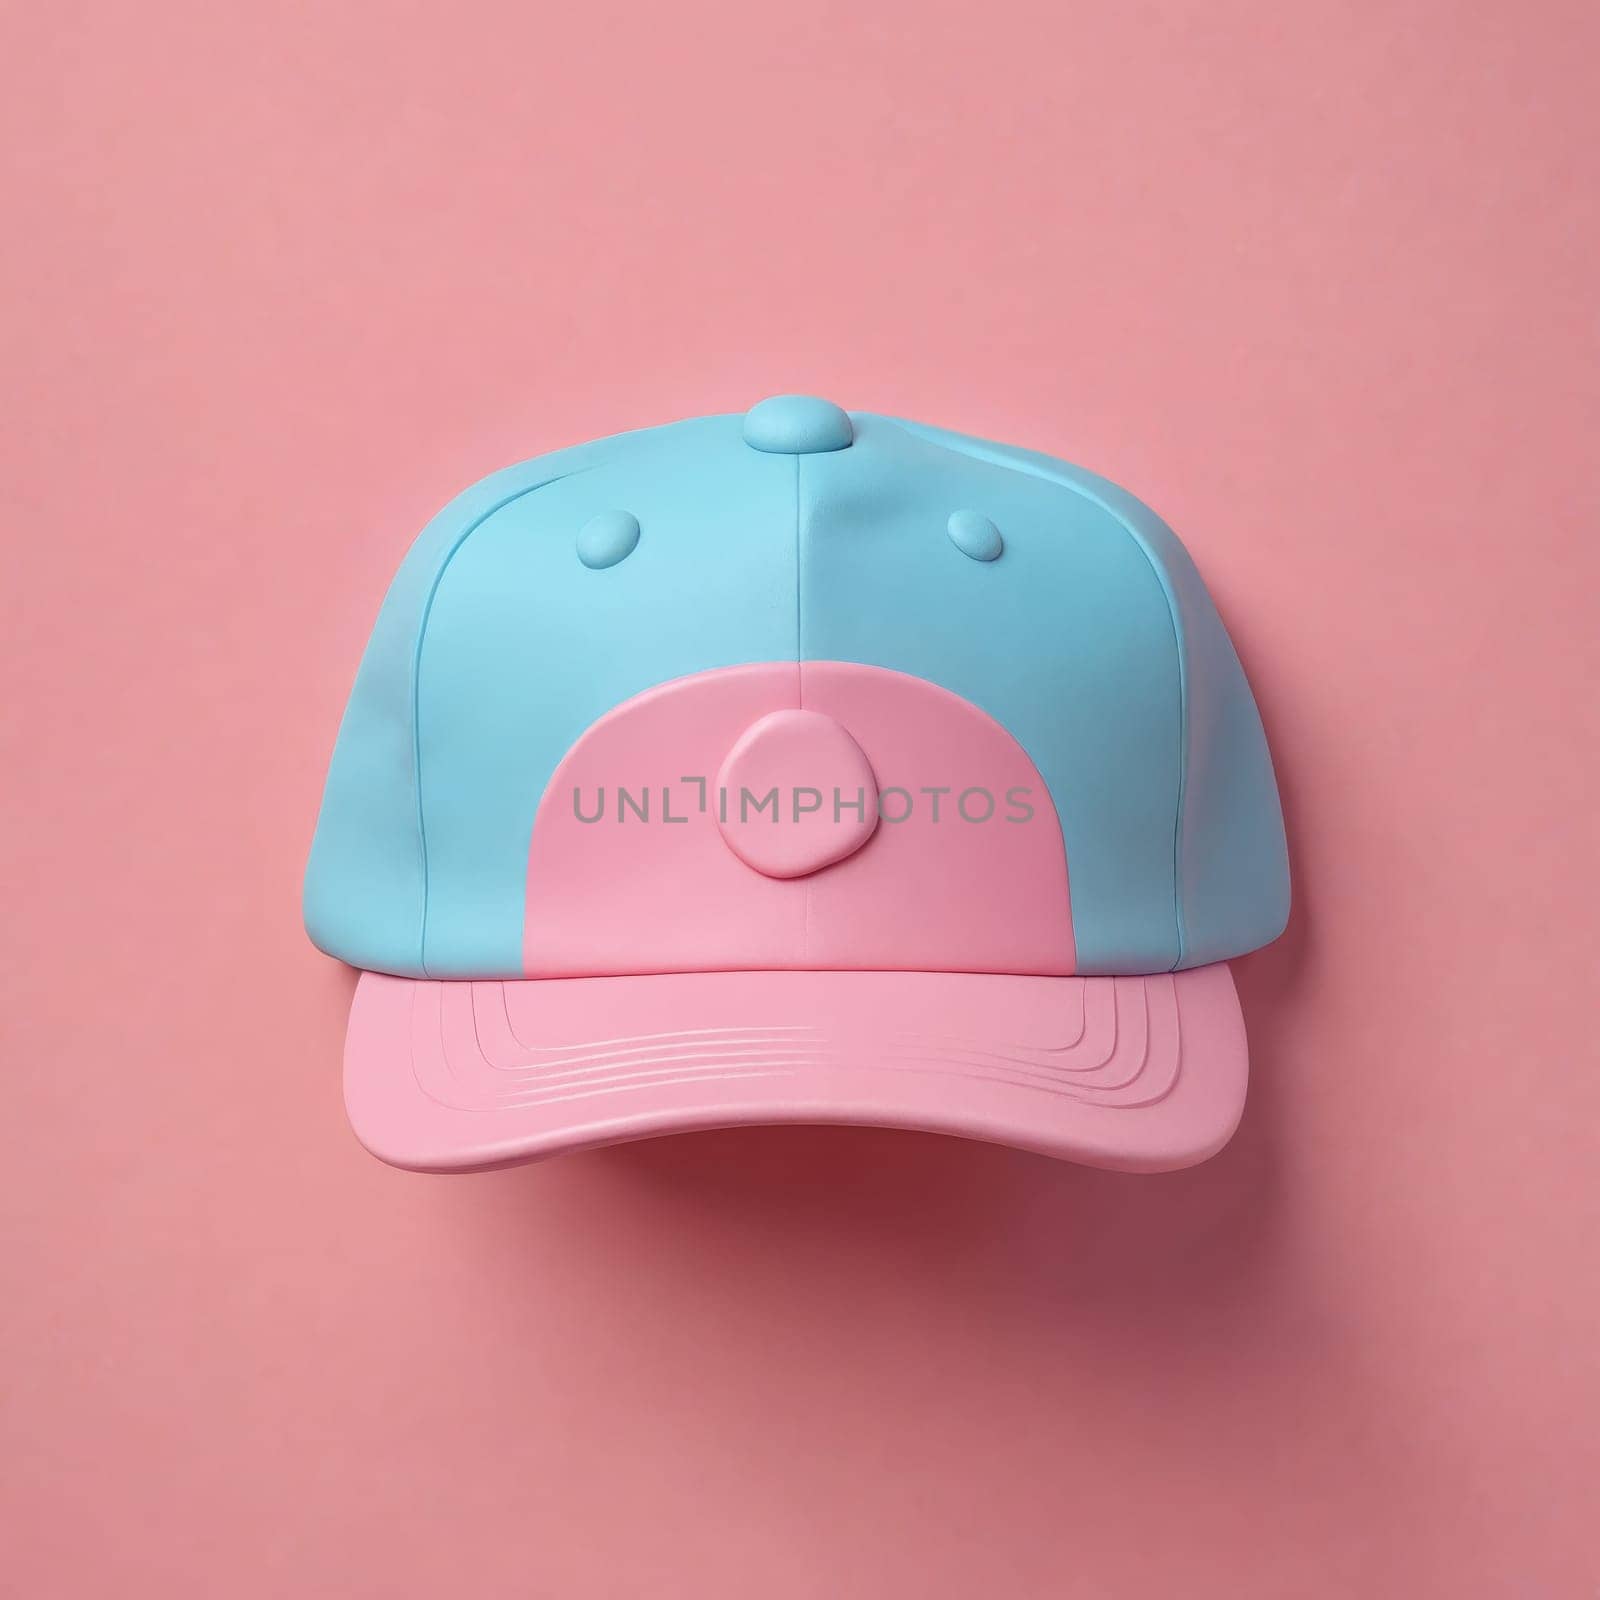 Magenta and electric blue baseball cap on pink background by Andre1ns